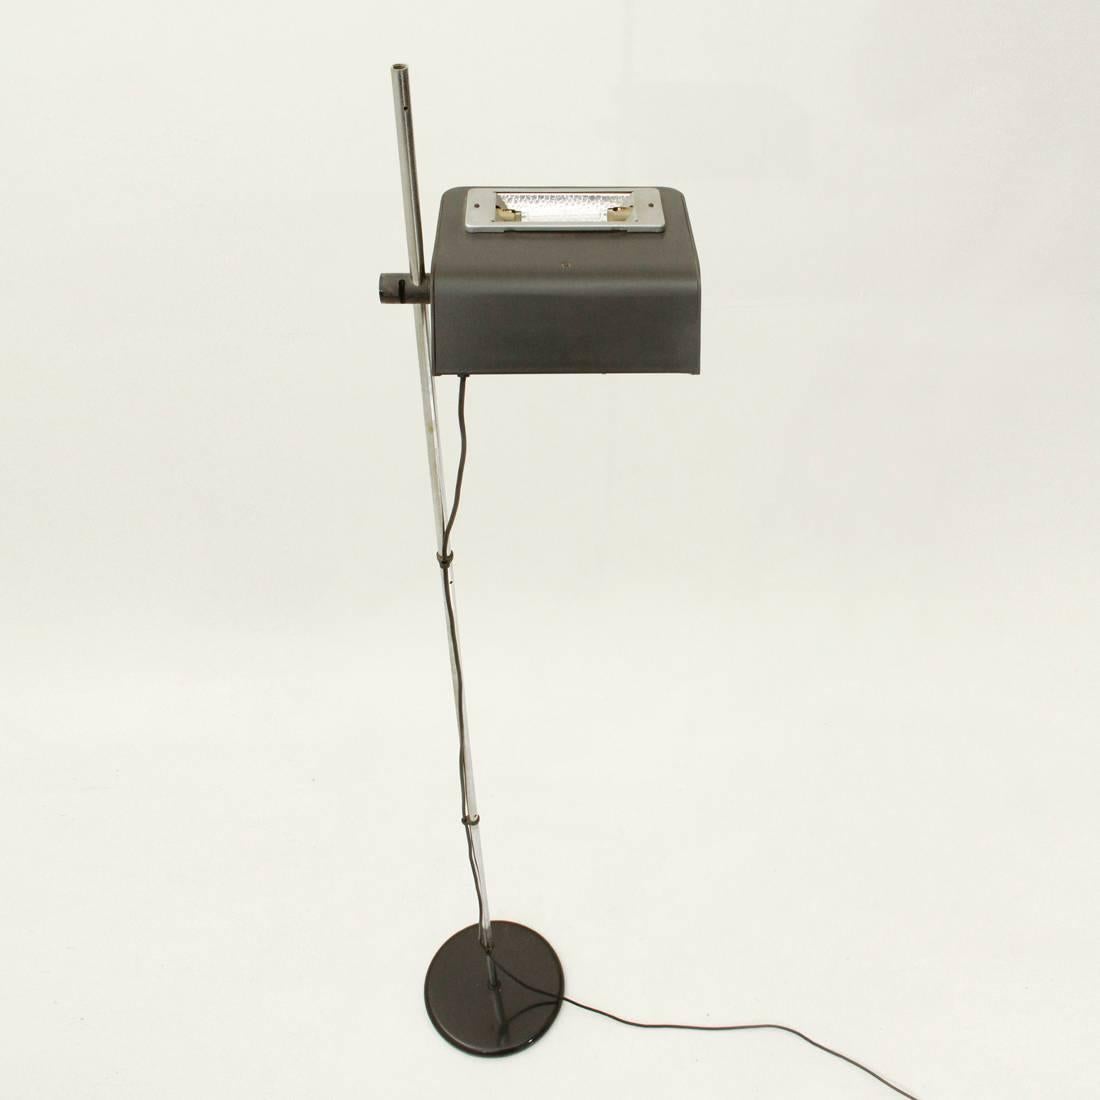 Lamp produced by Arteluce in 1976 on a project by Bruno Gecchelin.
Circular base in black painted metal, stem in chromed metal,
Reflector in black painted metal sliding on the stem.
Adjustable dimmer.
Mount halogen bulb.
Good general